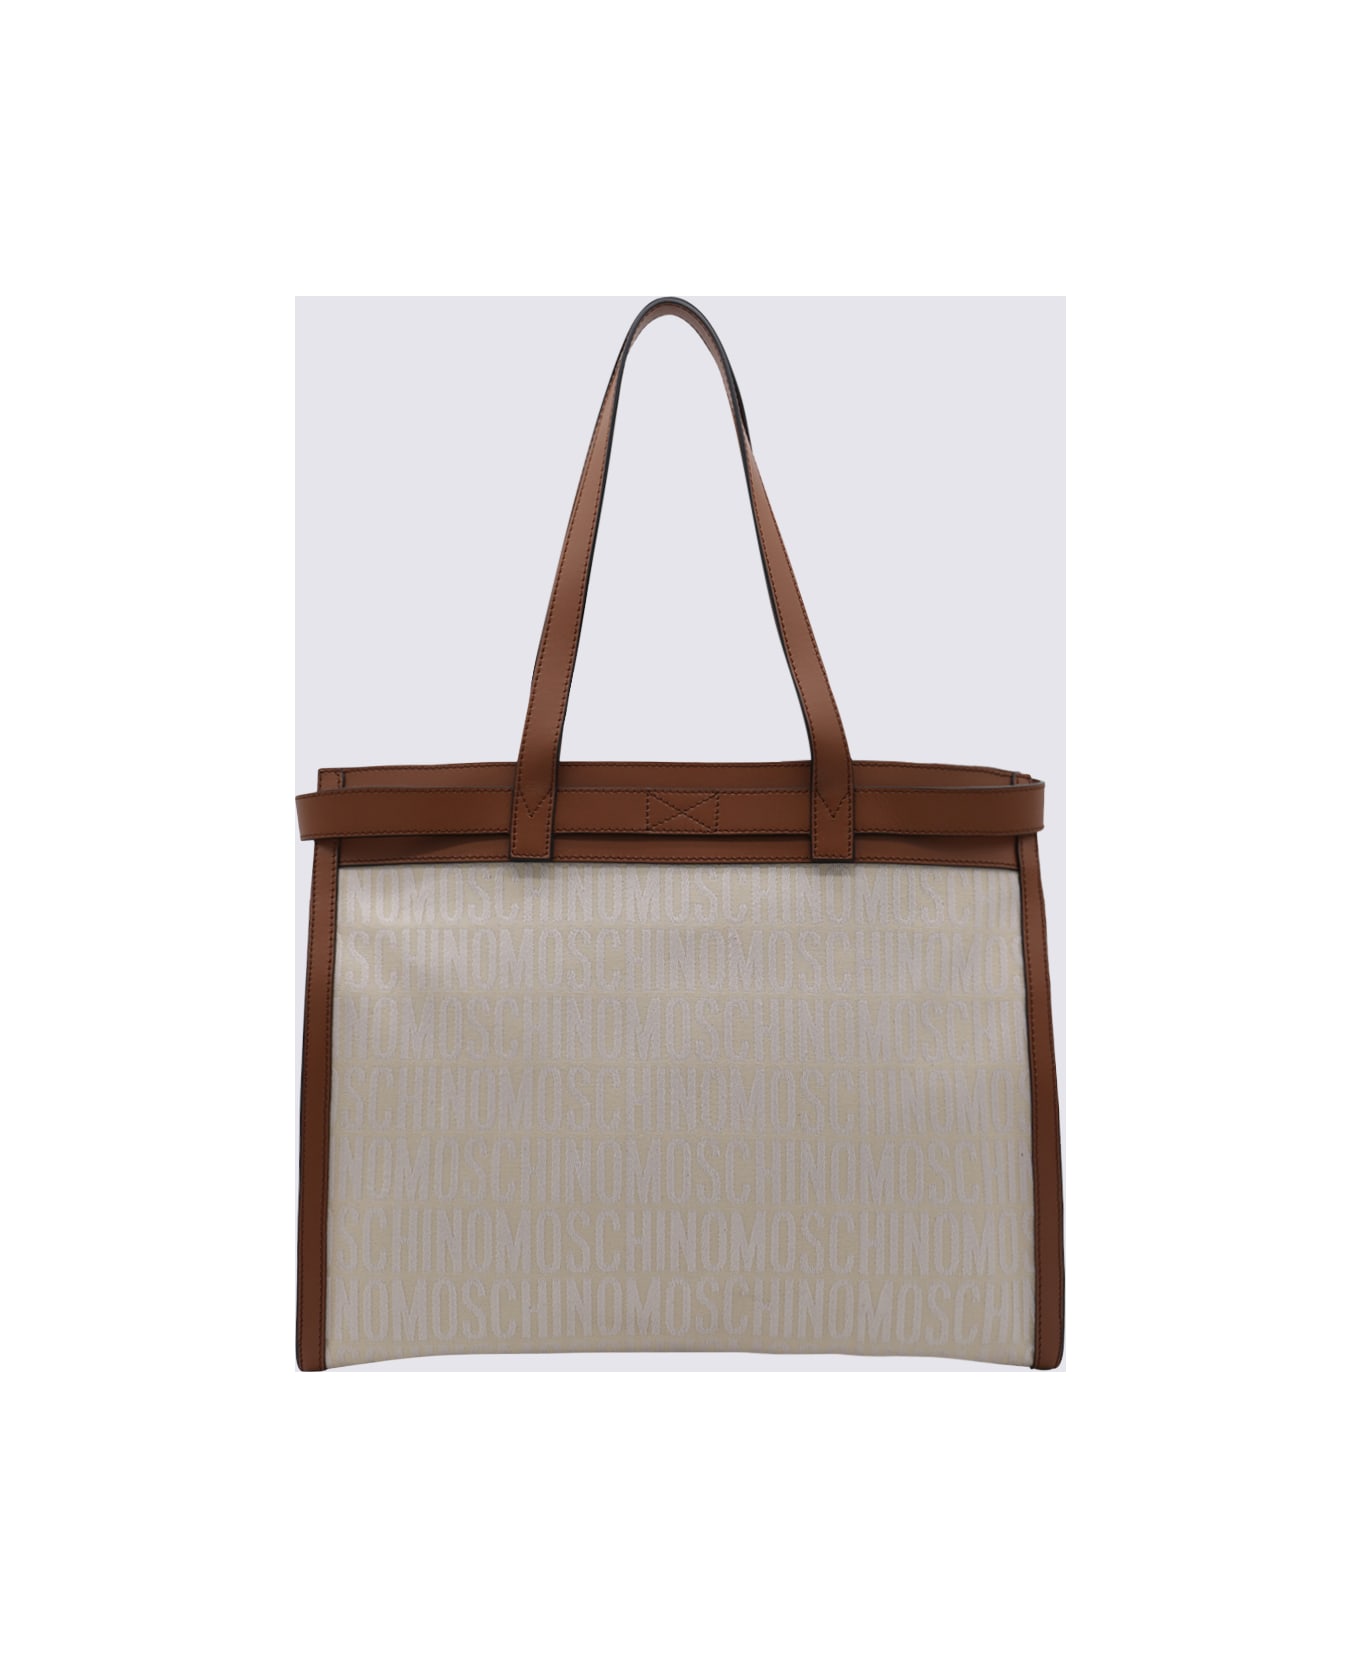 Moschino Ivory Canvas And Leather Tote Bag - White トートバッグ